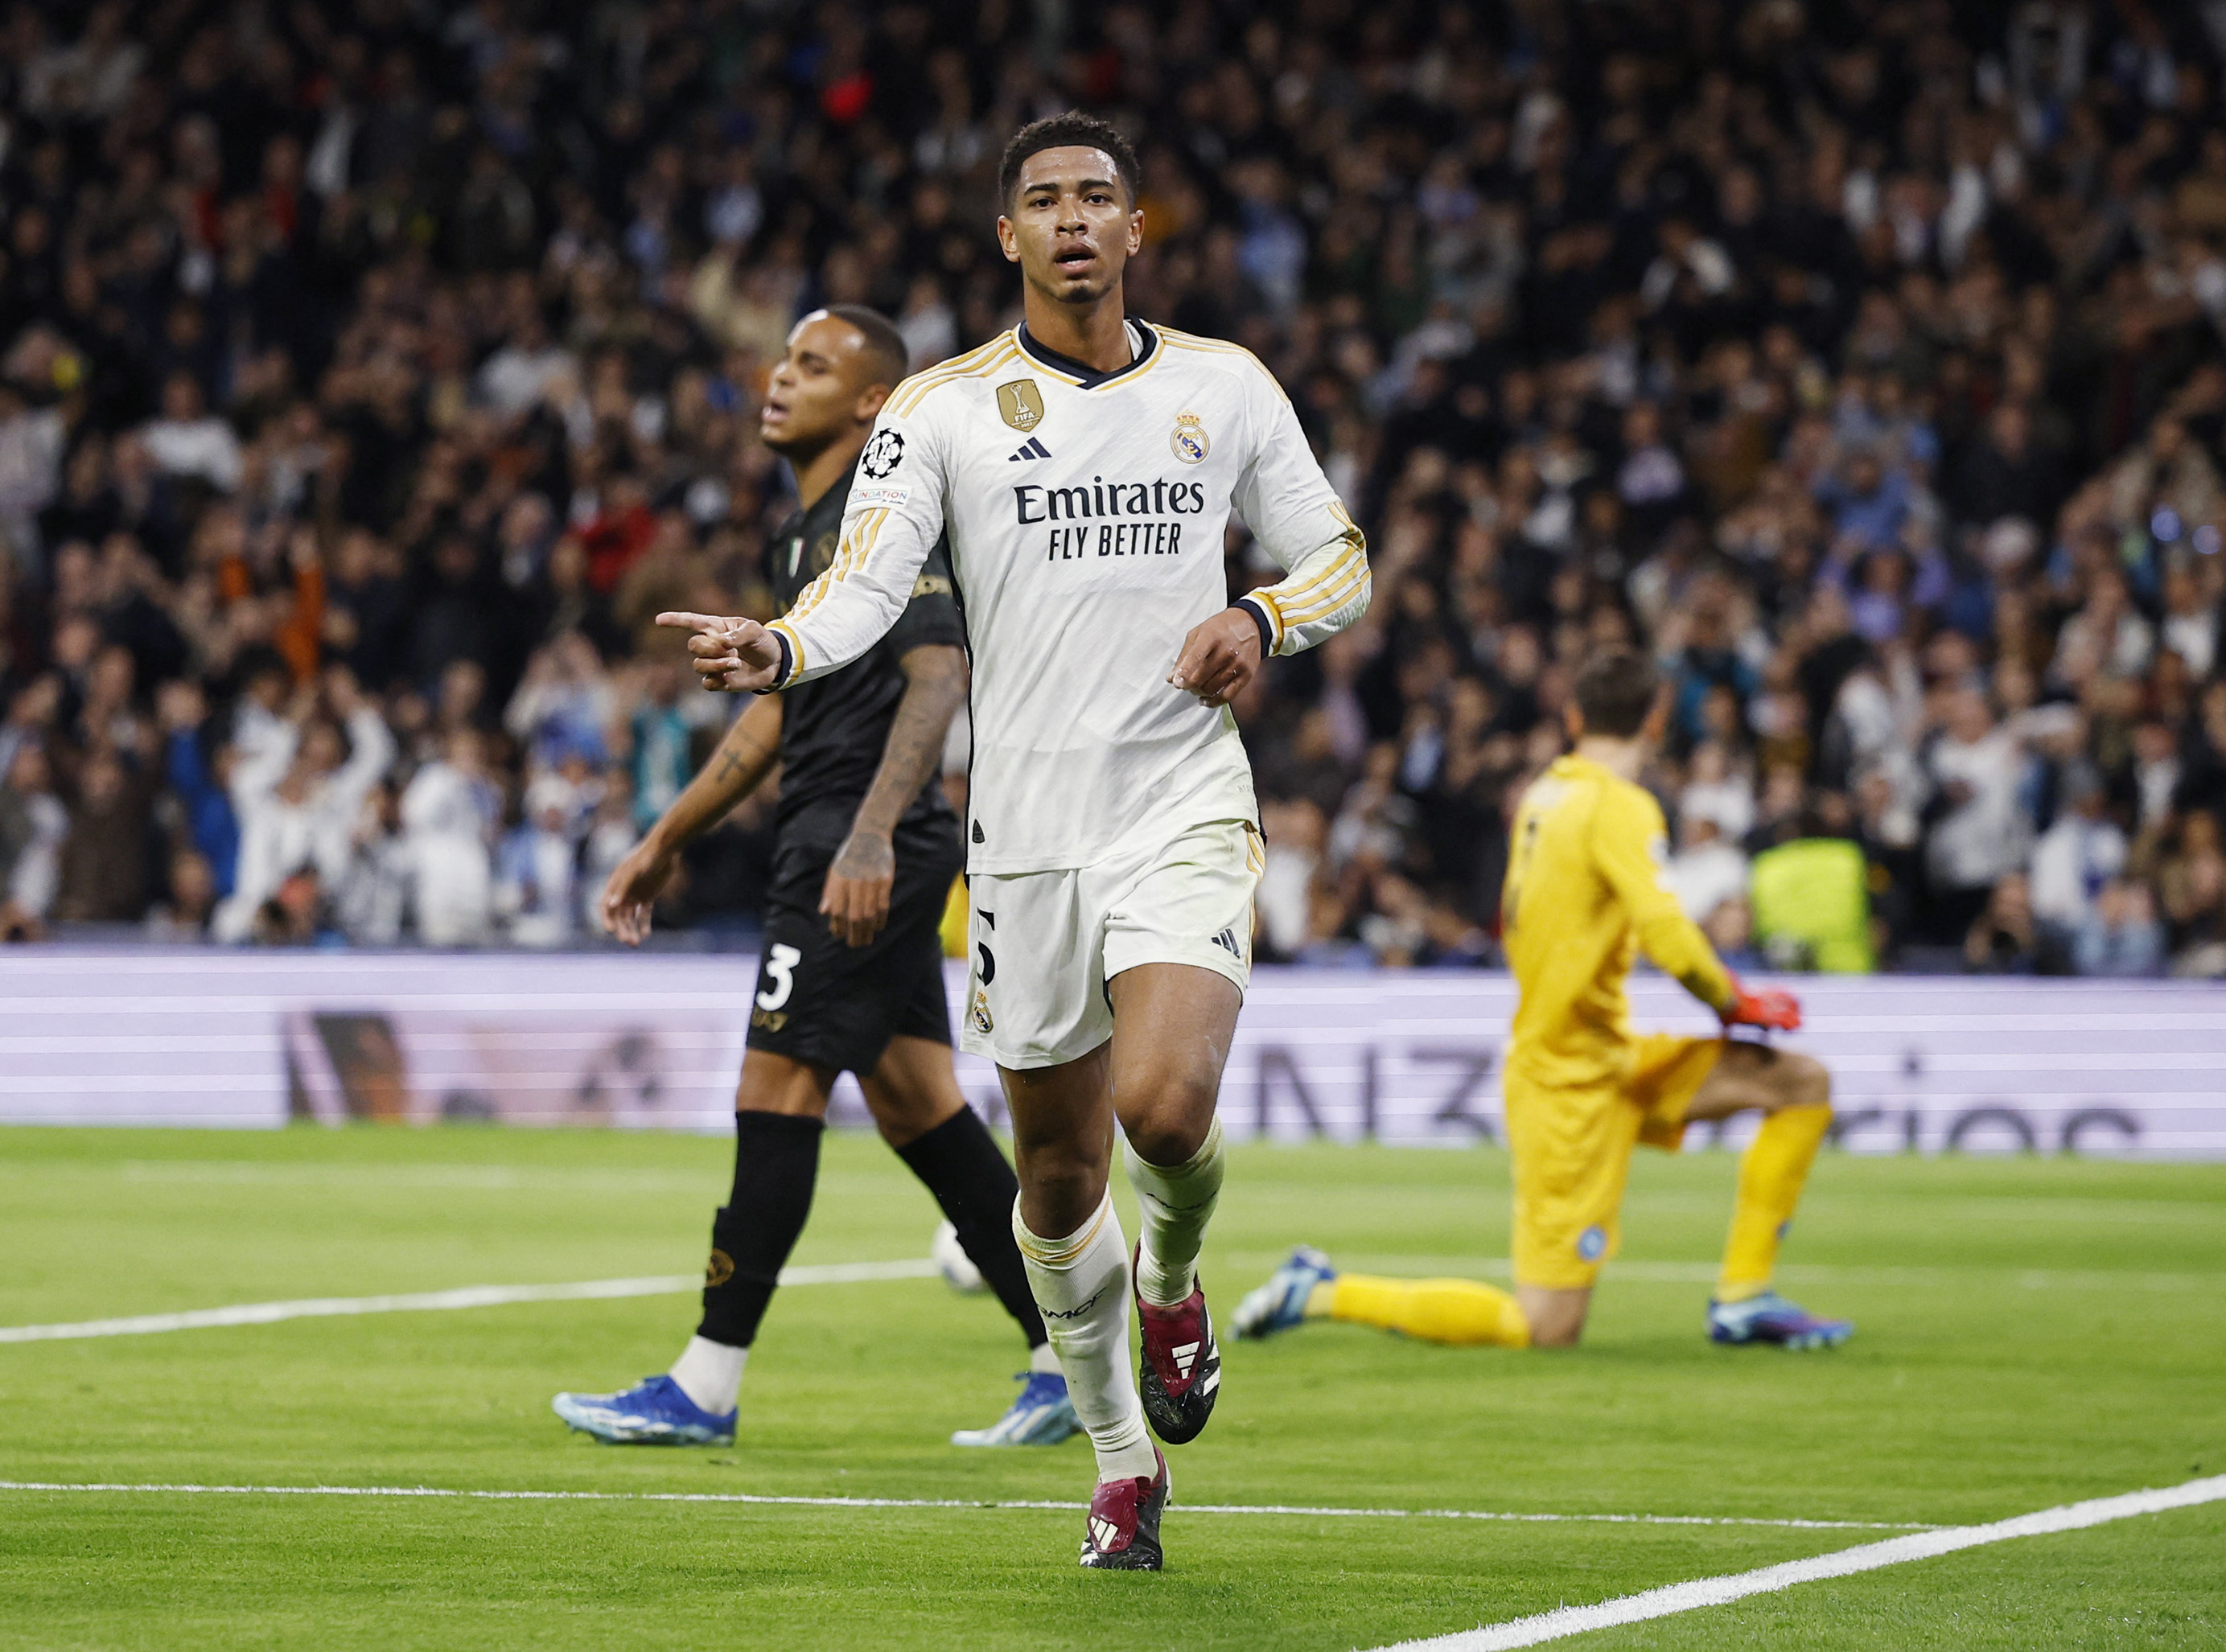 Real Madrid postpones Napoli’s qualification with an exciting victory